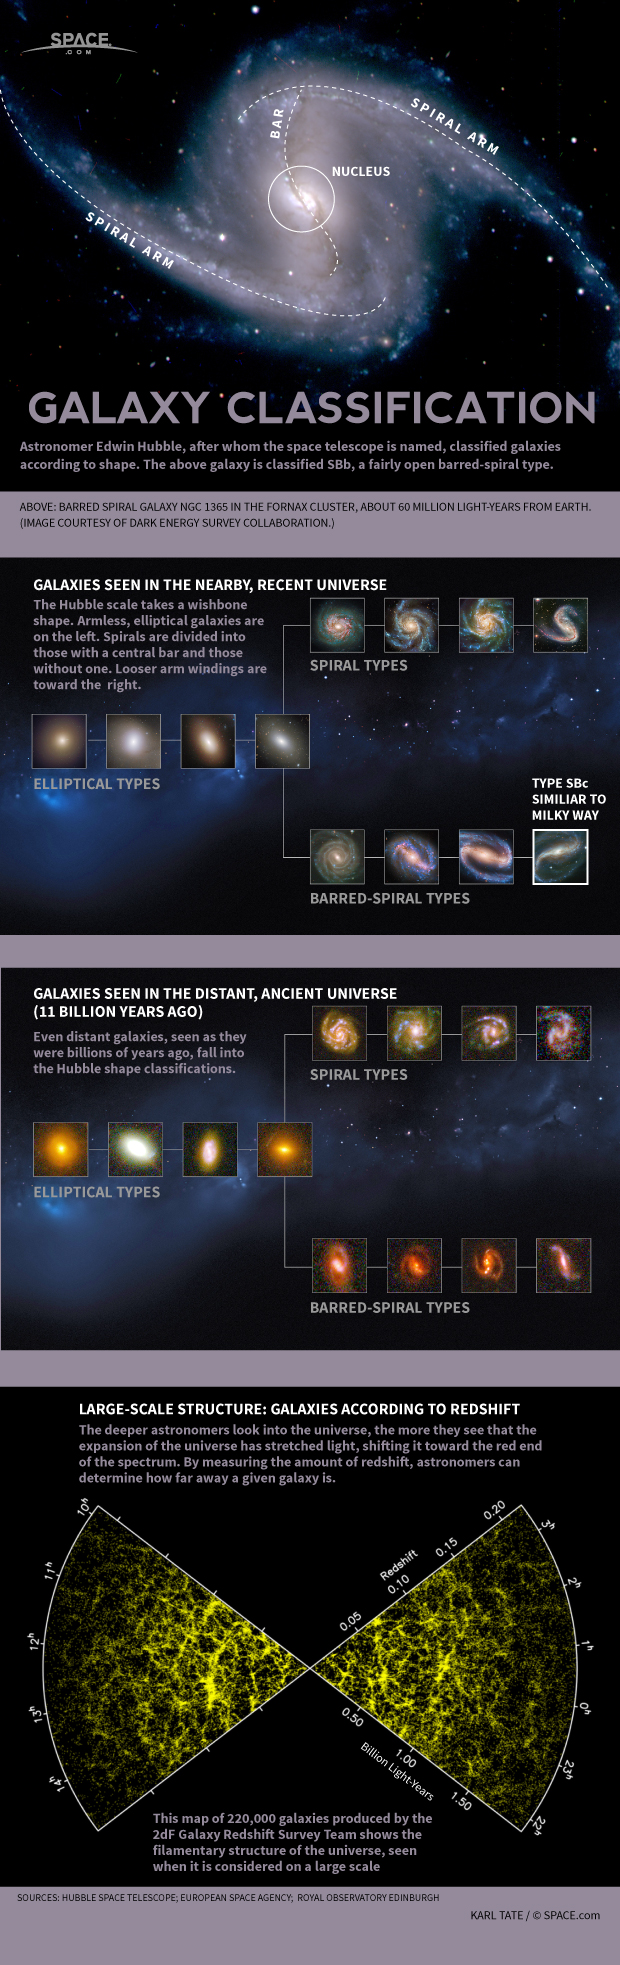 characteristic names and types of galaxies